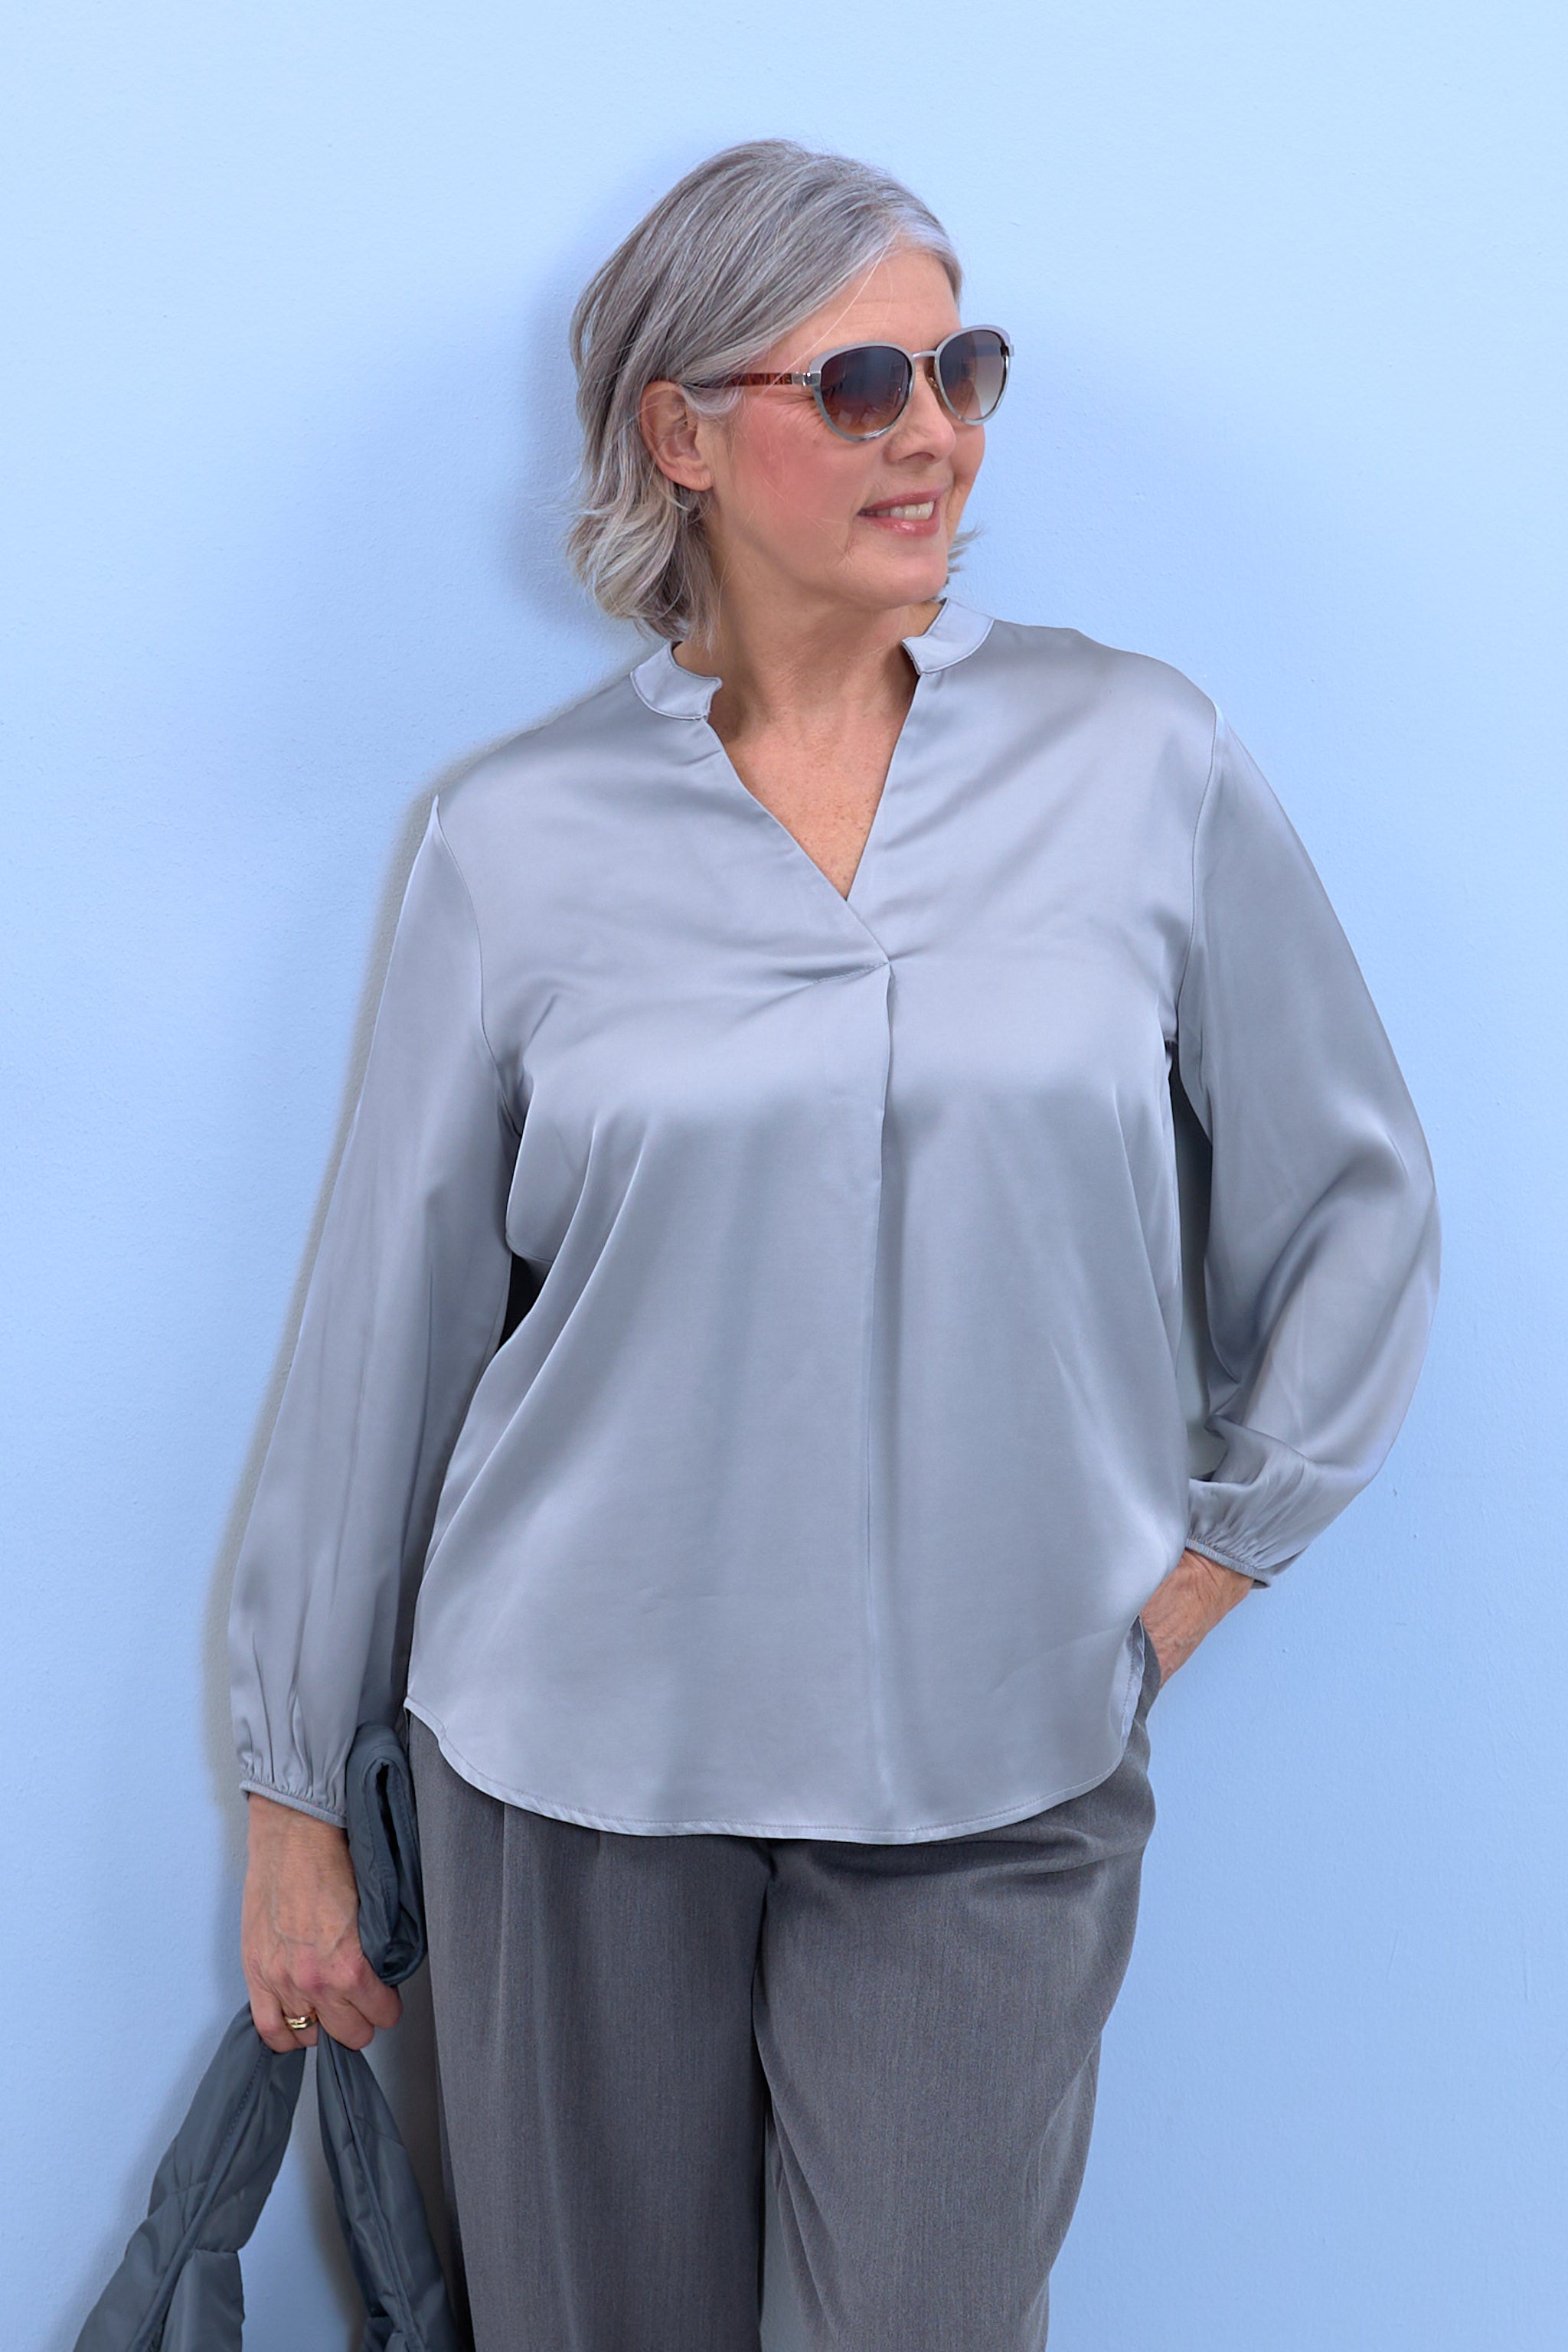 Blouse made of shiny fabric with V-neck, silver-grey